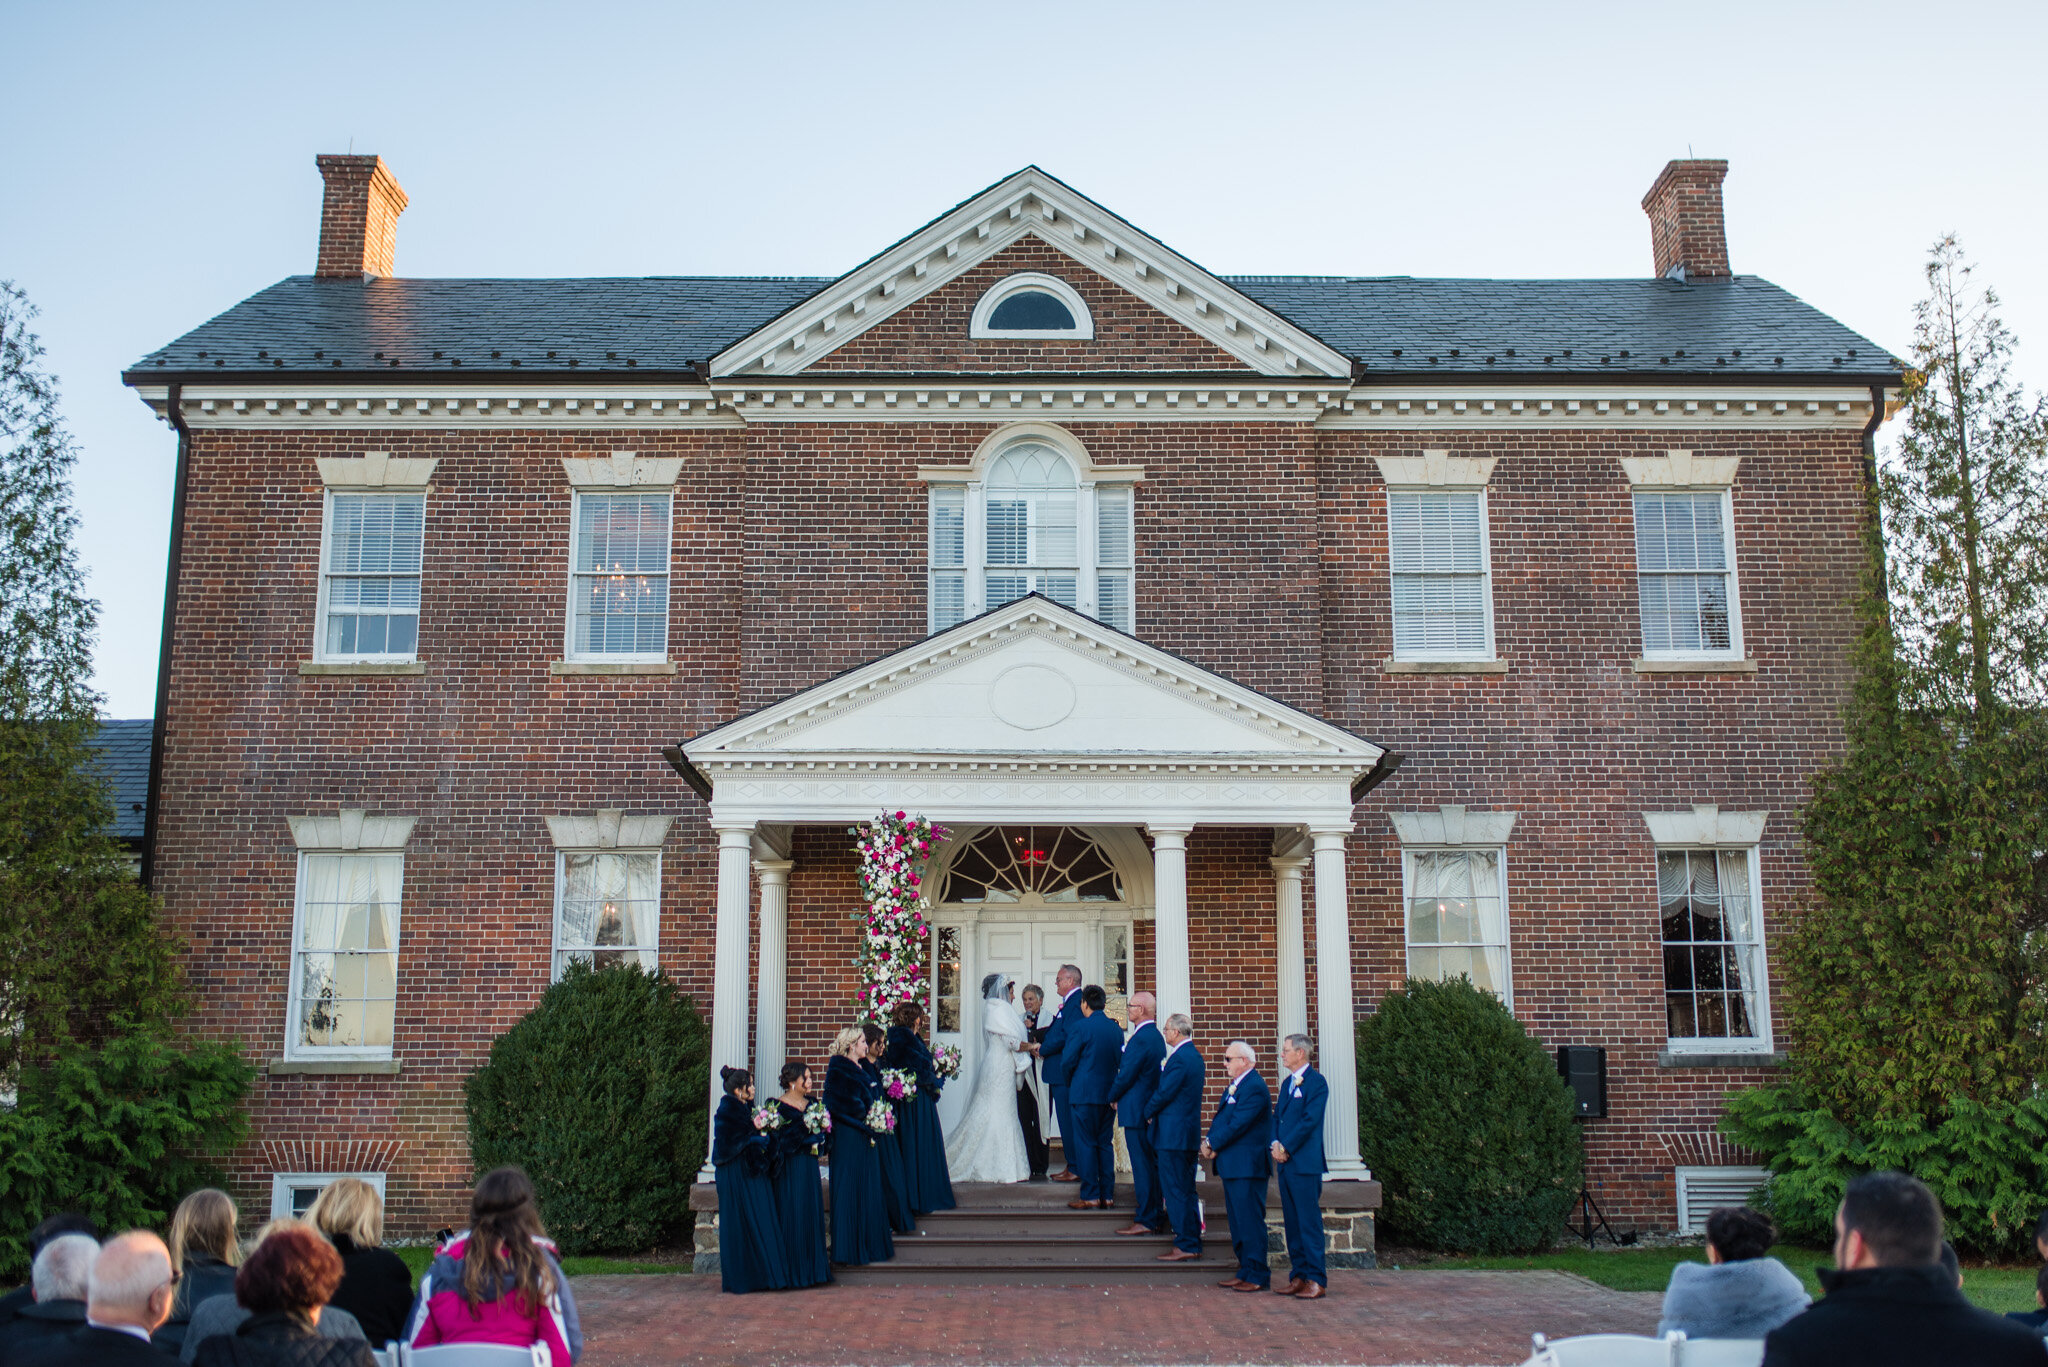 Wedding at Belmont Country Club in Ashburn, Virginia.